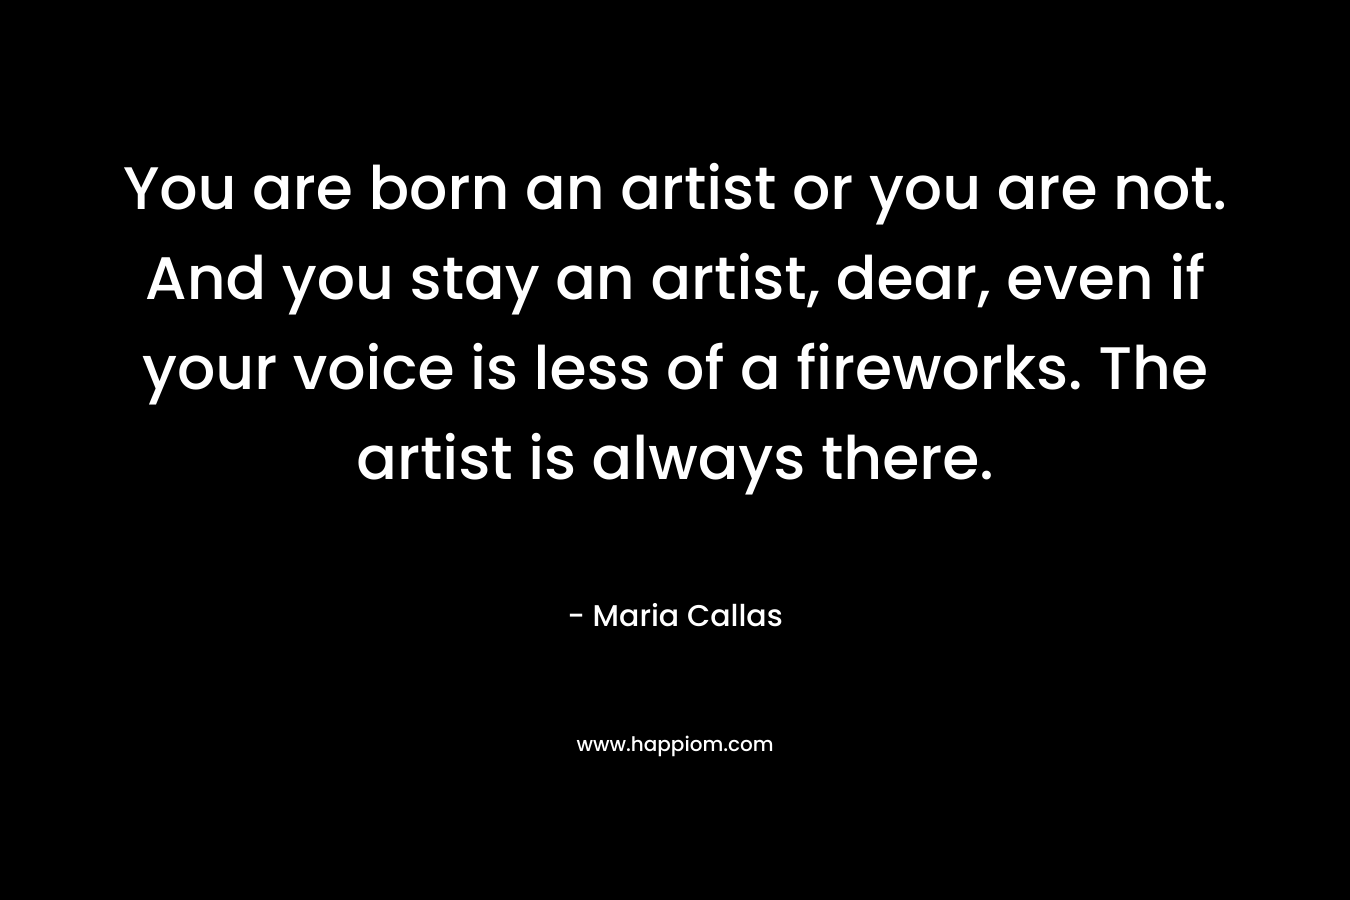 You are born an artist or you are not. And you stay an artist, dear, even if your voice is less of a fireworks. The artist is always there. – Maria Callas